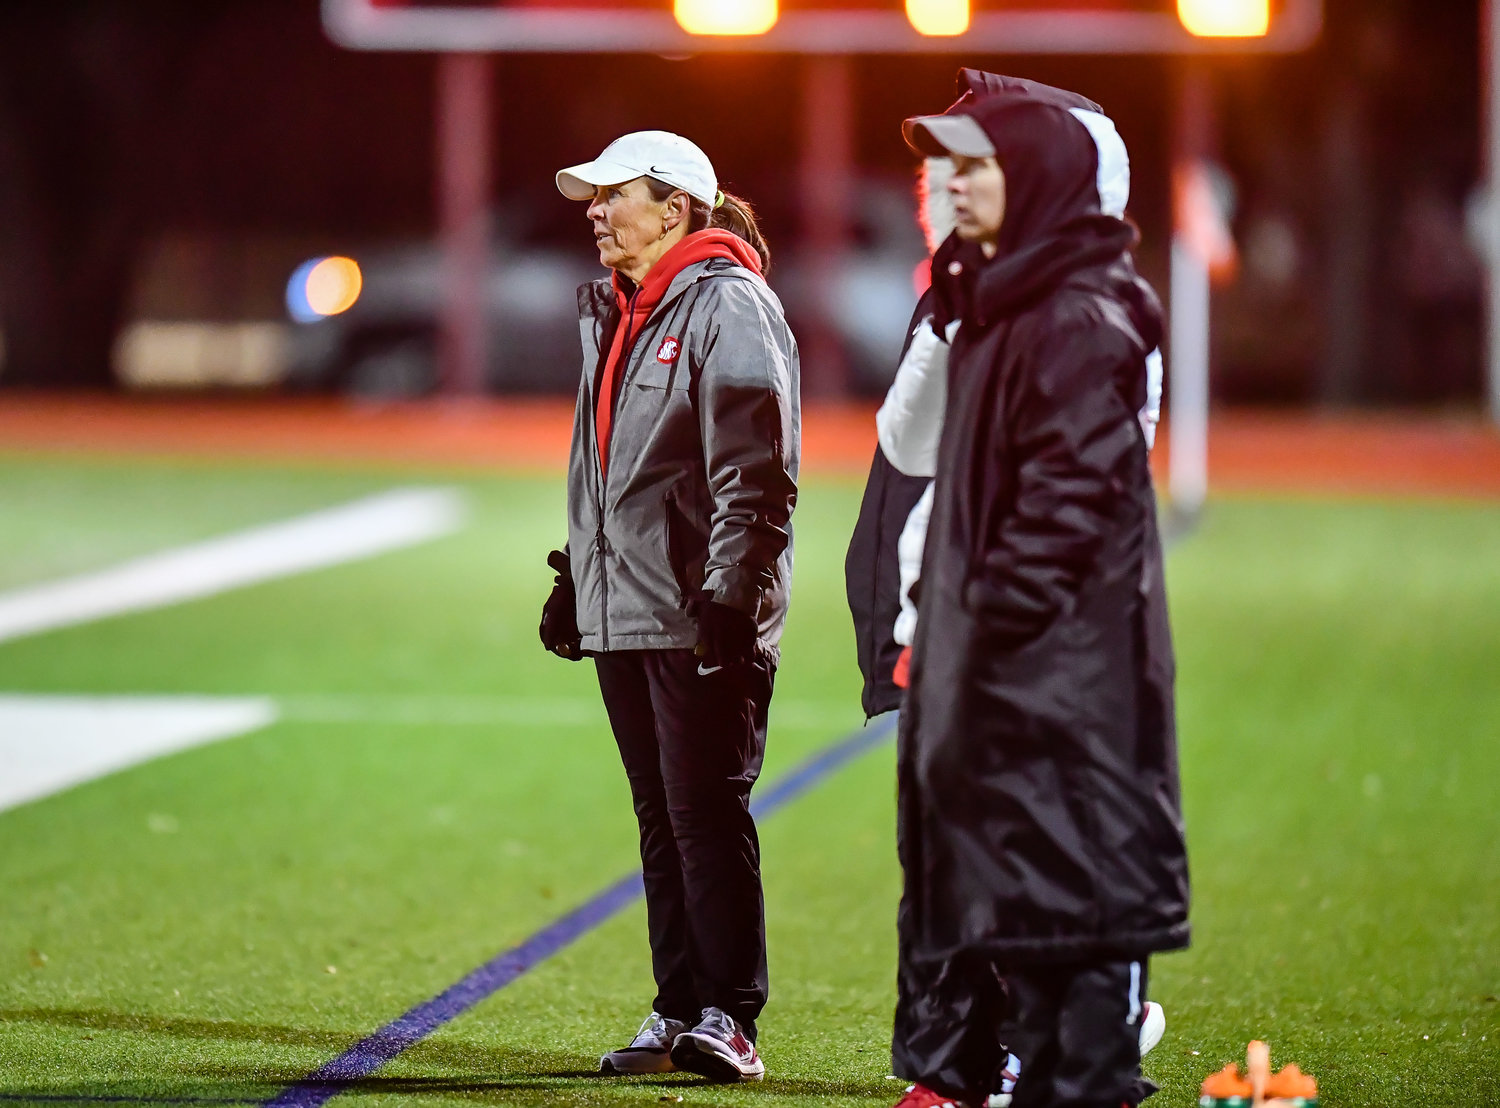 March 8,, 2022: Katy's head coach Dianne Loftin looks on at her lady Tigers during their soccer match against Katy Taylor. (Photo by Mark Goodman / Katy Times)